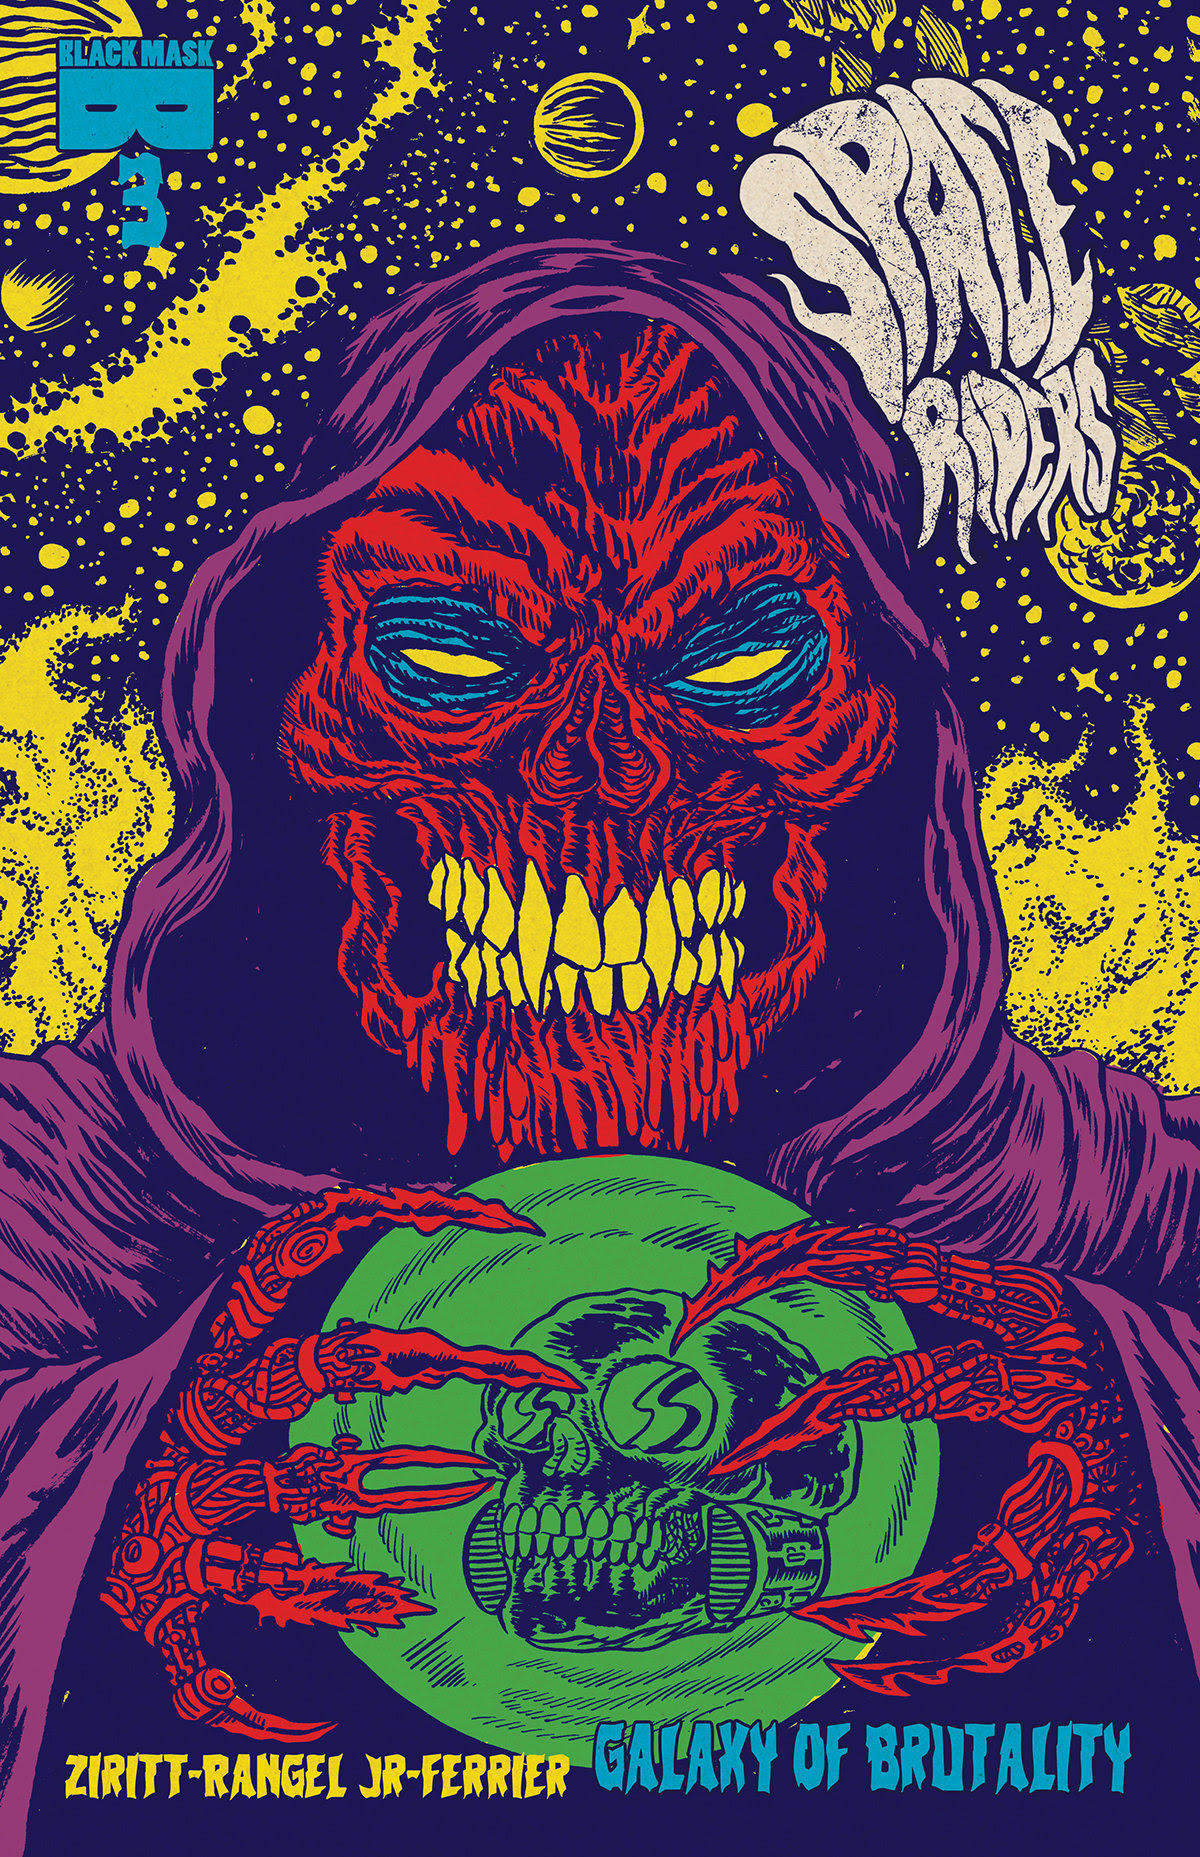 Space Riders: Galaxy of Brutality #3